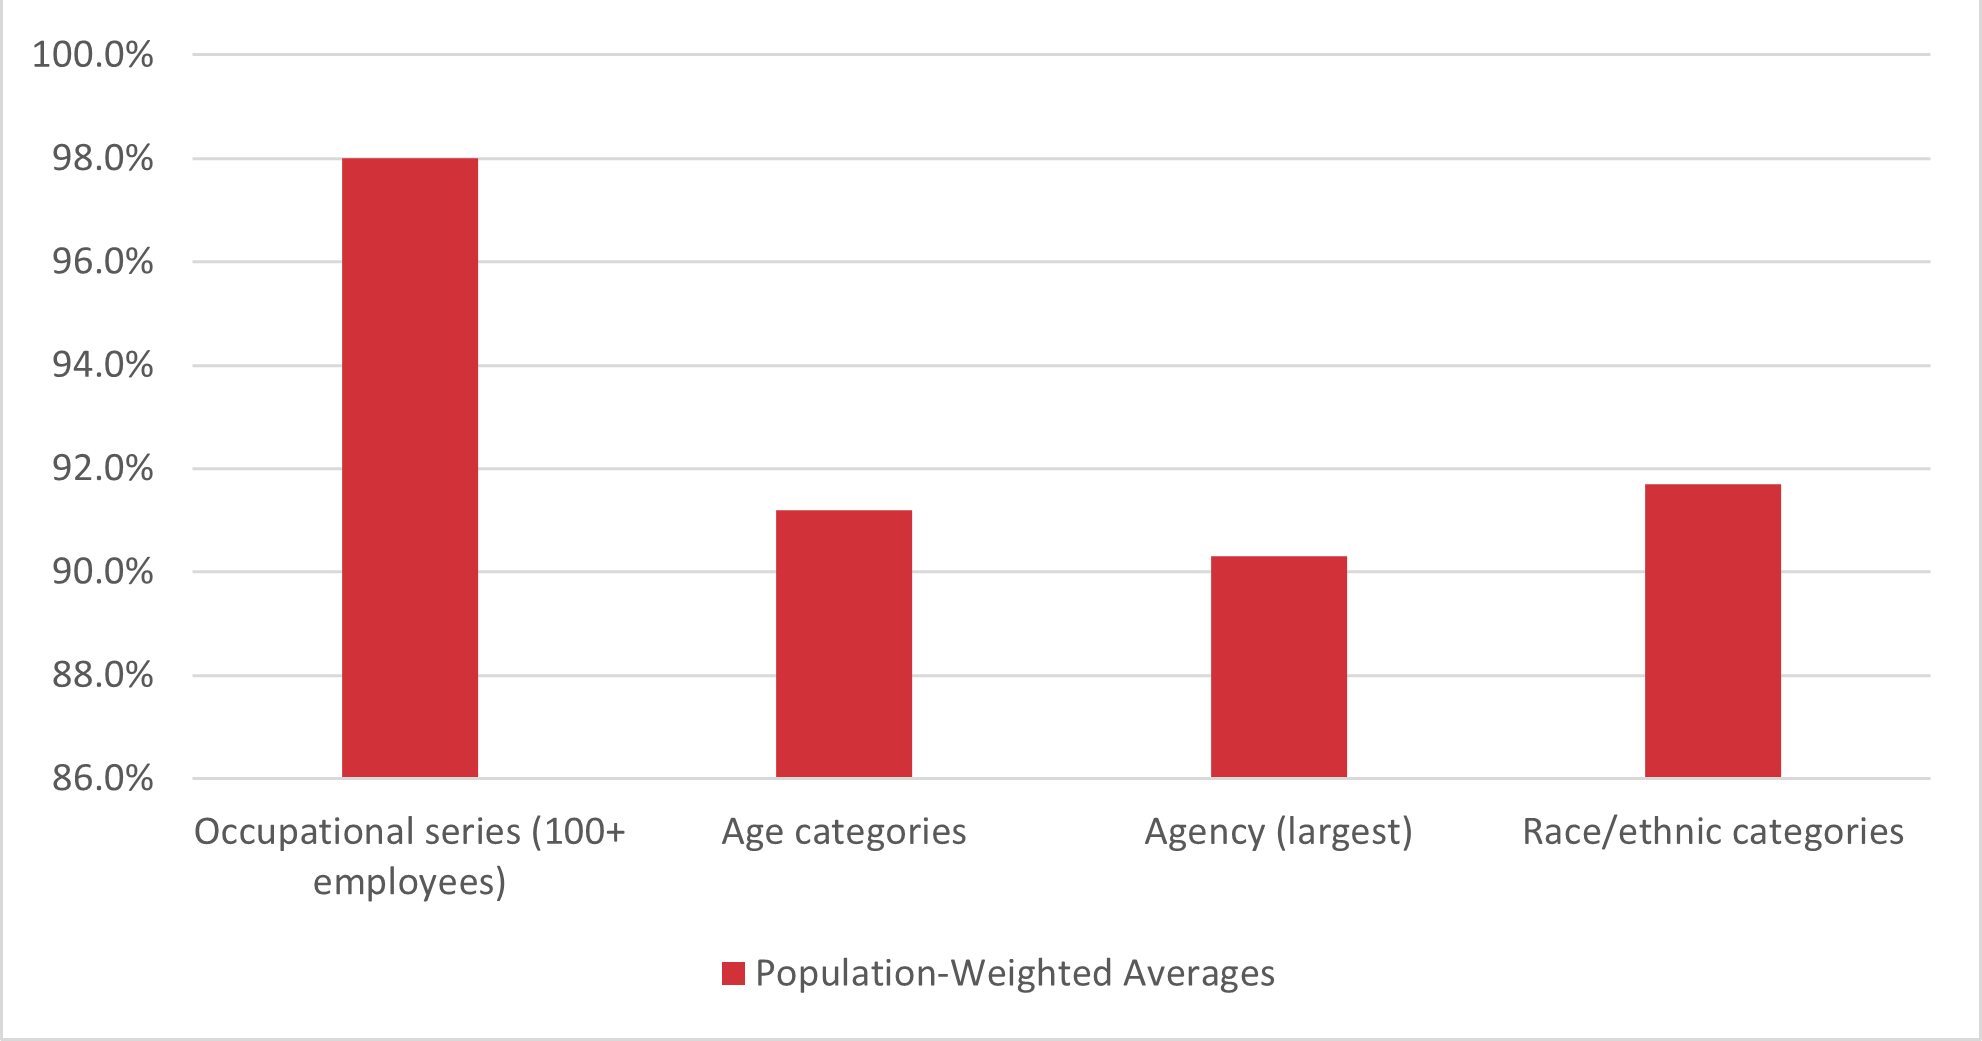 Population-Weighted Averages for White Collar Employees bar graph. Full text description in the table 5b.